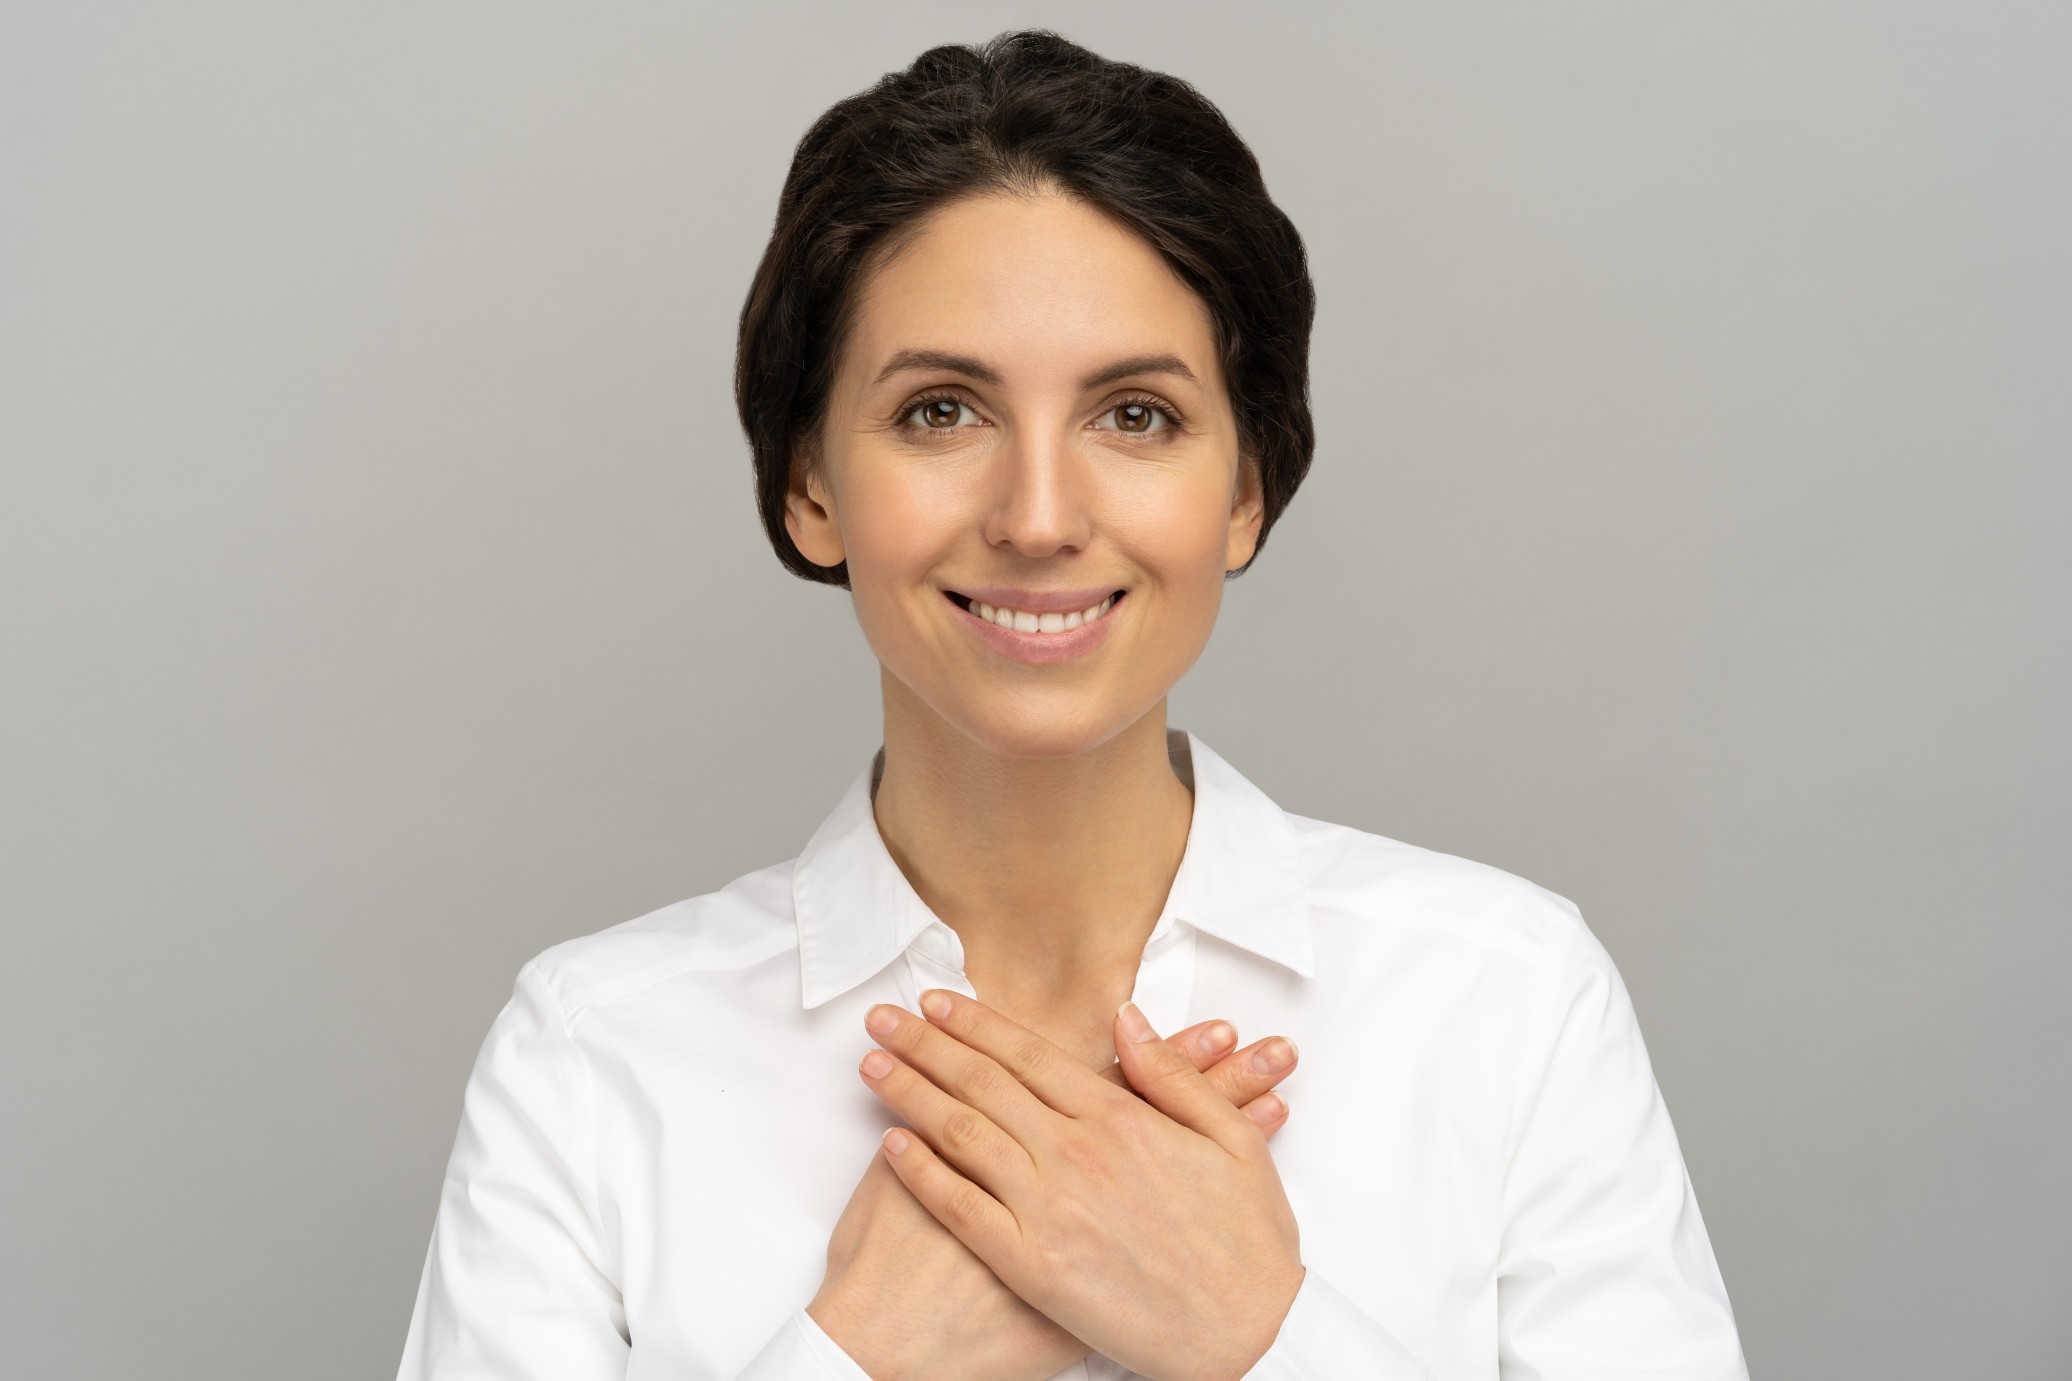 woman-smiling-with-both-hands-on-heart